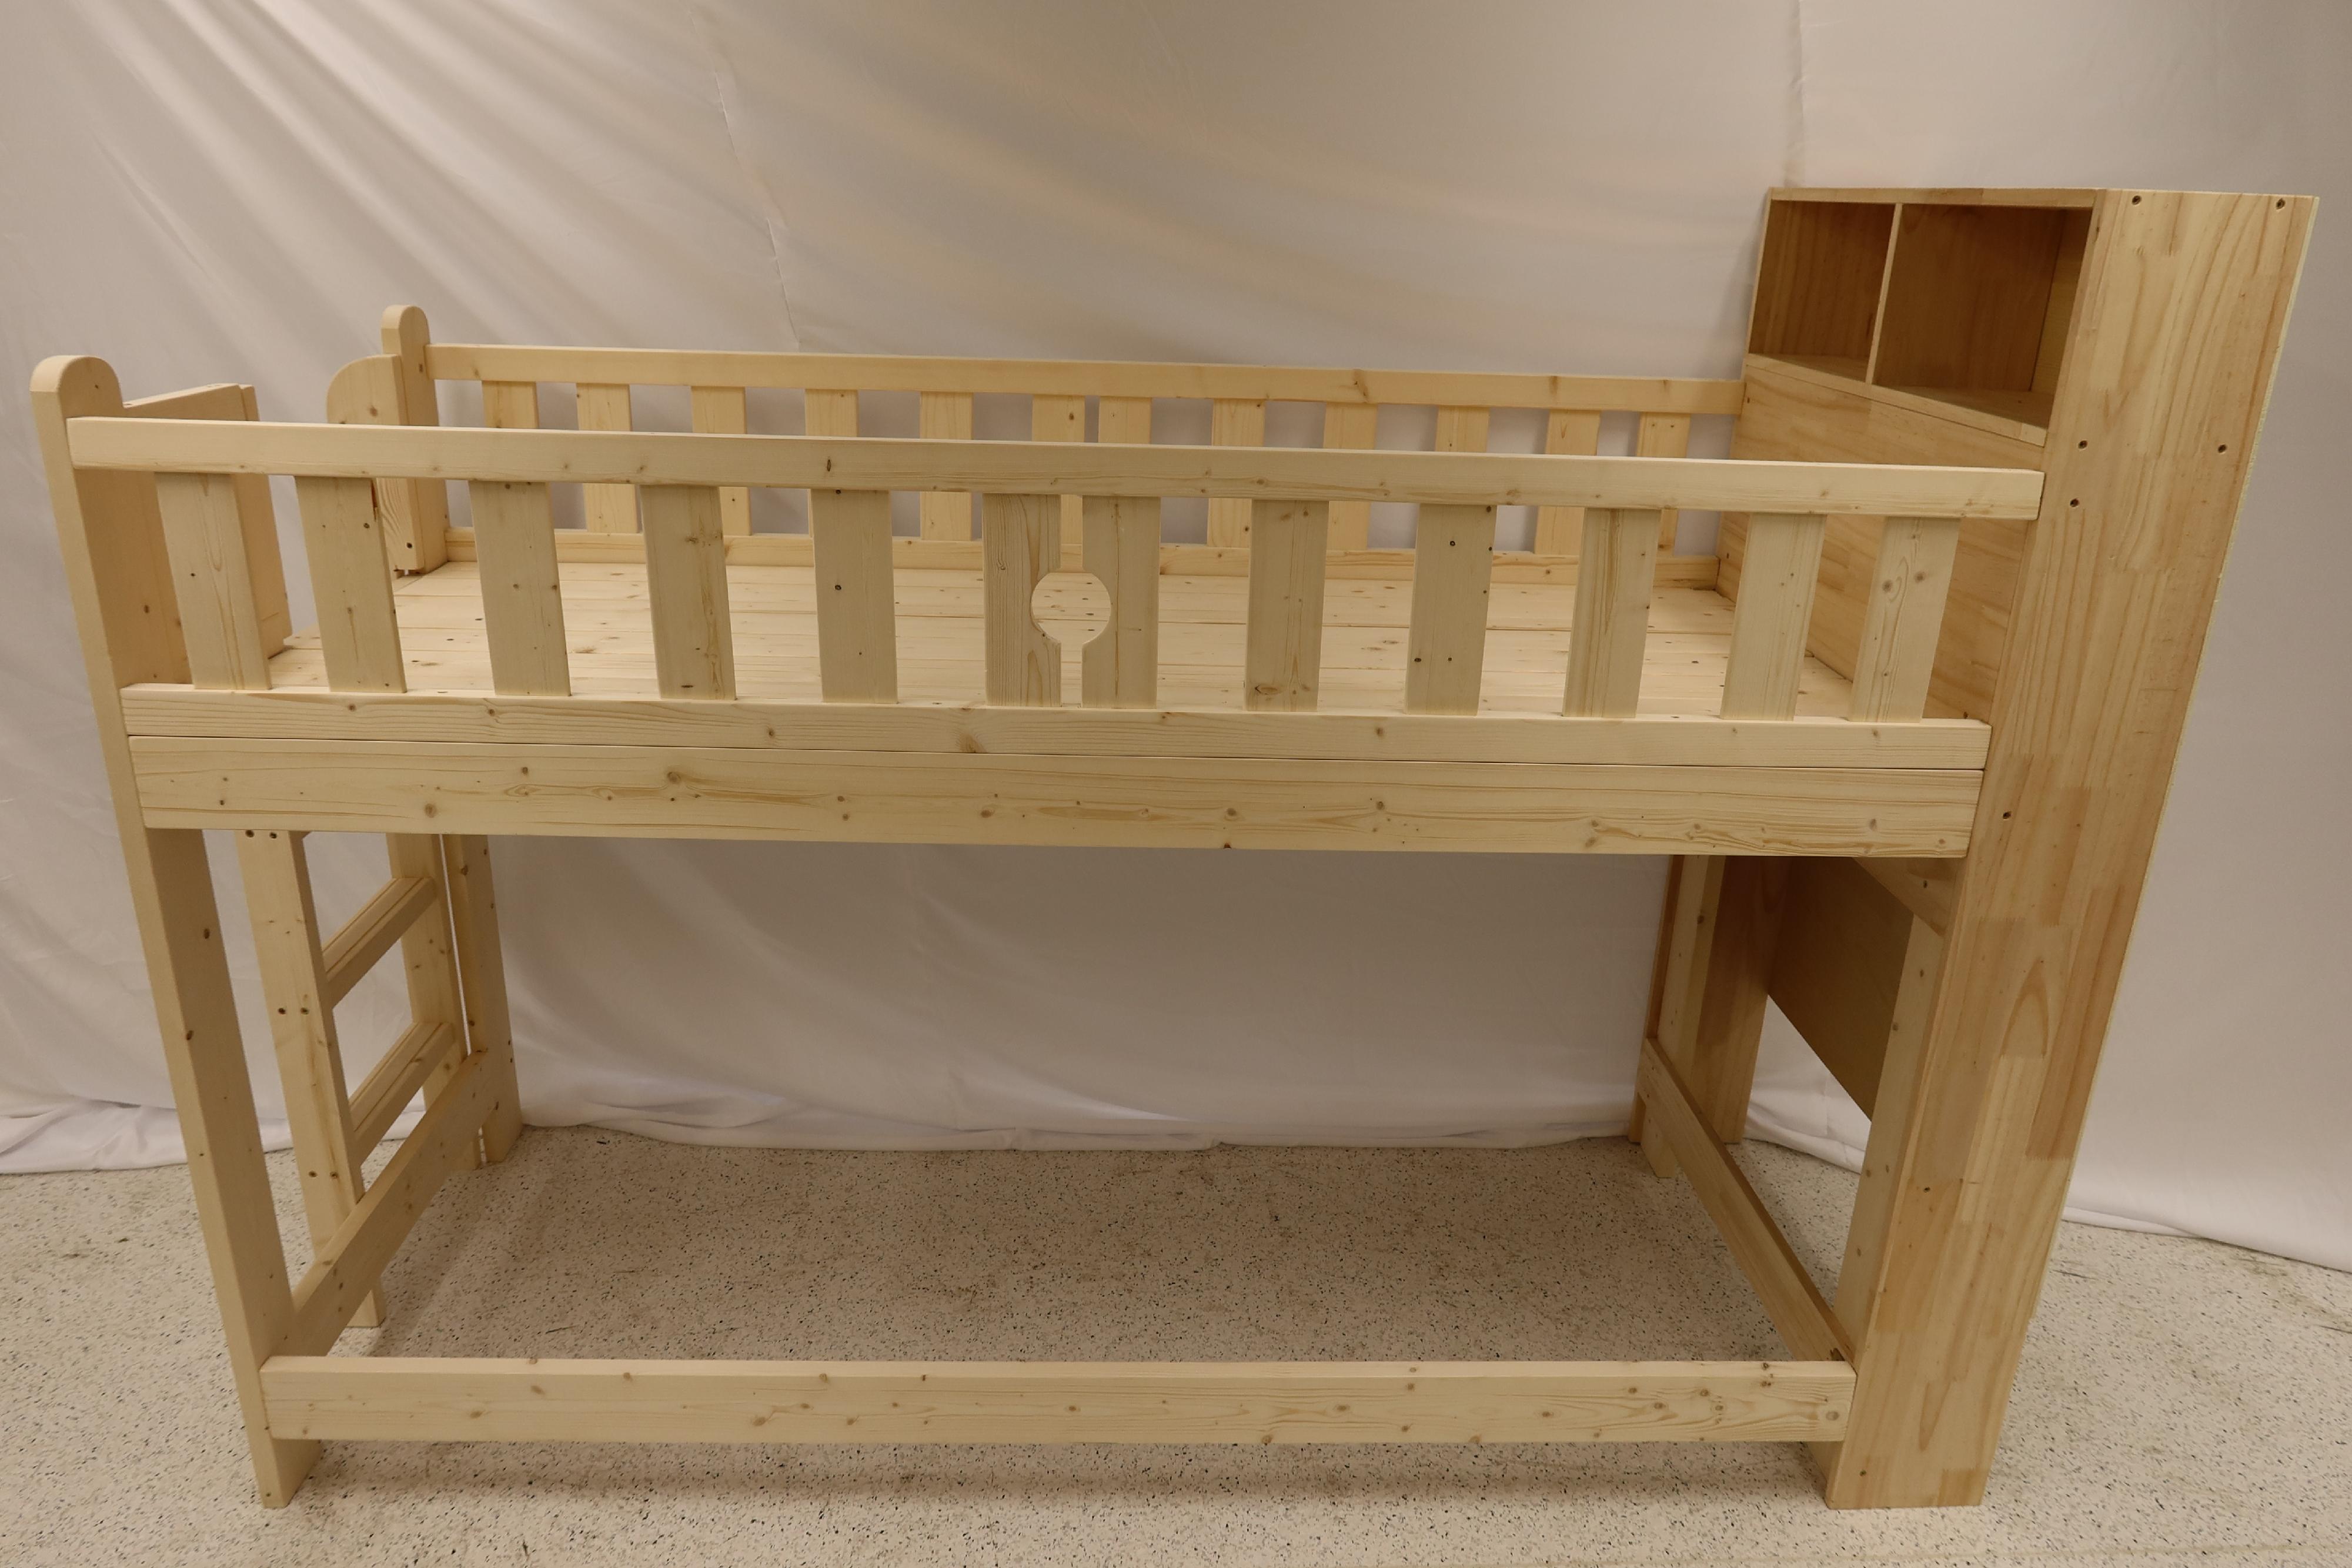 Hong Kong Customs today (May 27) alerted members of the public to a model of unsafe children's loft bed which could pose a risk of entrapment and injury to its users. Photo shows the children's loft bed concerned.